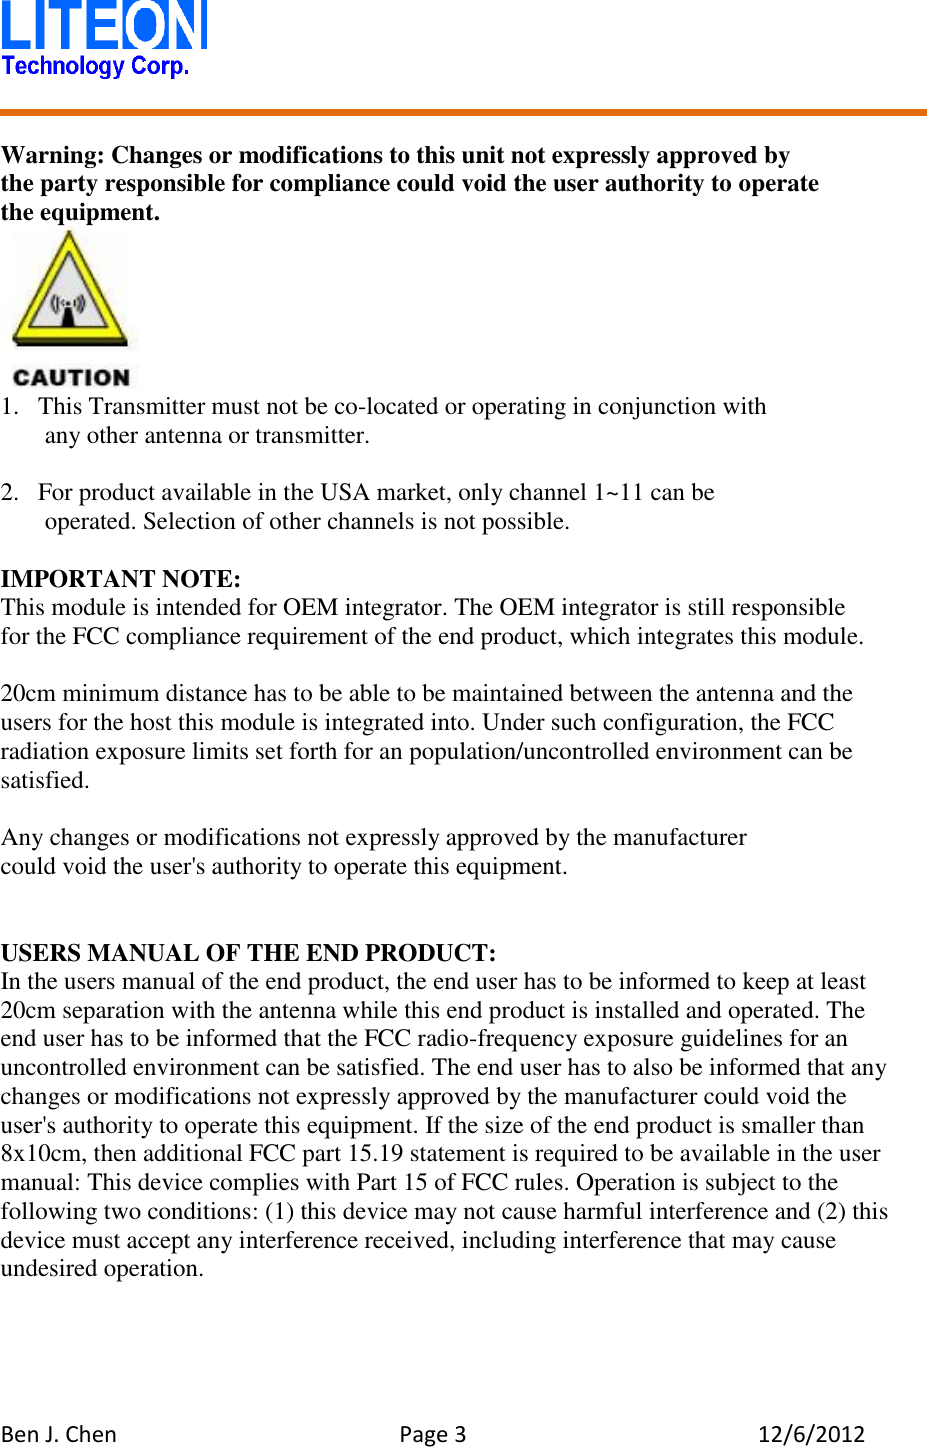   Ben J. Chen  Page 3  12/6/2012    Warning: Changes or modifications to this unit not expressly approved by the party responsible for compliance could void the user authority to operate   the equipment.  1. This Transmitter must not be co-located or operating in conjunction with any other antenna or transmitter.  2. For product available in the USA market, only channel 1~11 can be operated. Selection of other channels is not possible.  IMPORTANT NOTE: This module is intended for OEM integrator. The OEM integrator is still responsible   for the FCC compliance requirement of the end product, which integrates this module.  20cm minimum distance has to be able to be maintained between the antenna and the users for the host this module is integrated into. Under such configuration, the FCC radiation exposure limits set forth for an population/uncontrolled environment can be satisfied.  Any changes or modifications not expressly approved by the manufacturer could void the user&apos;s authority to operate this equipment.   USERS MANUAL OF THE END PRODUCT: In the users manual of the end product, the end user has to be informed to keep at least 20cm separation with the antenna while this end product is installed and operated. The end user has to be informed that the FCC radio-frequency exposure guidelines for an uncontrolled environment can be satisfied. The end user has to also be informed that any changes or modifications not expressly approved by the manufacturer could void the user&apos;s authority to operate this equipment. If the size of the end product is smaller than 8x10cm, then additional FCC part 15.19 statement is required to be available in the user manual: This device complies with Part 15 of FCC rules. Operation is subject to the following two conditions: (1) this device may not cause harmful interference and (2) this device must accept any interference received, including interference that may cause undesired operation. 